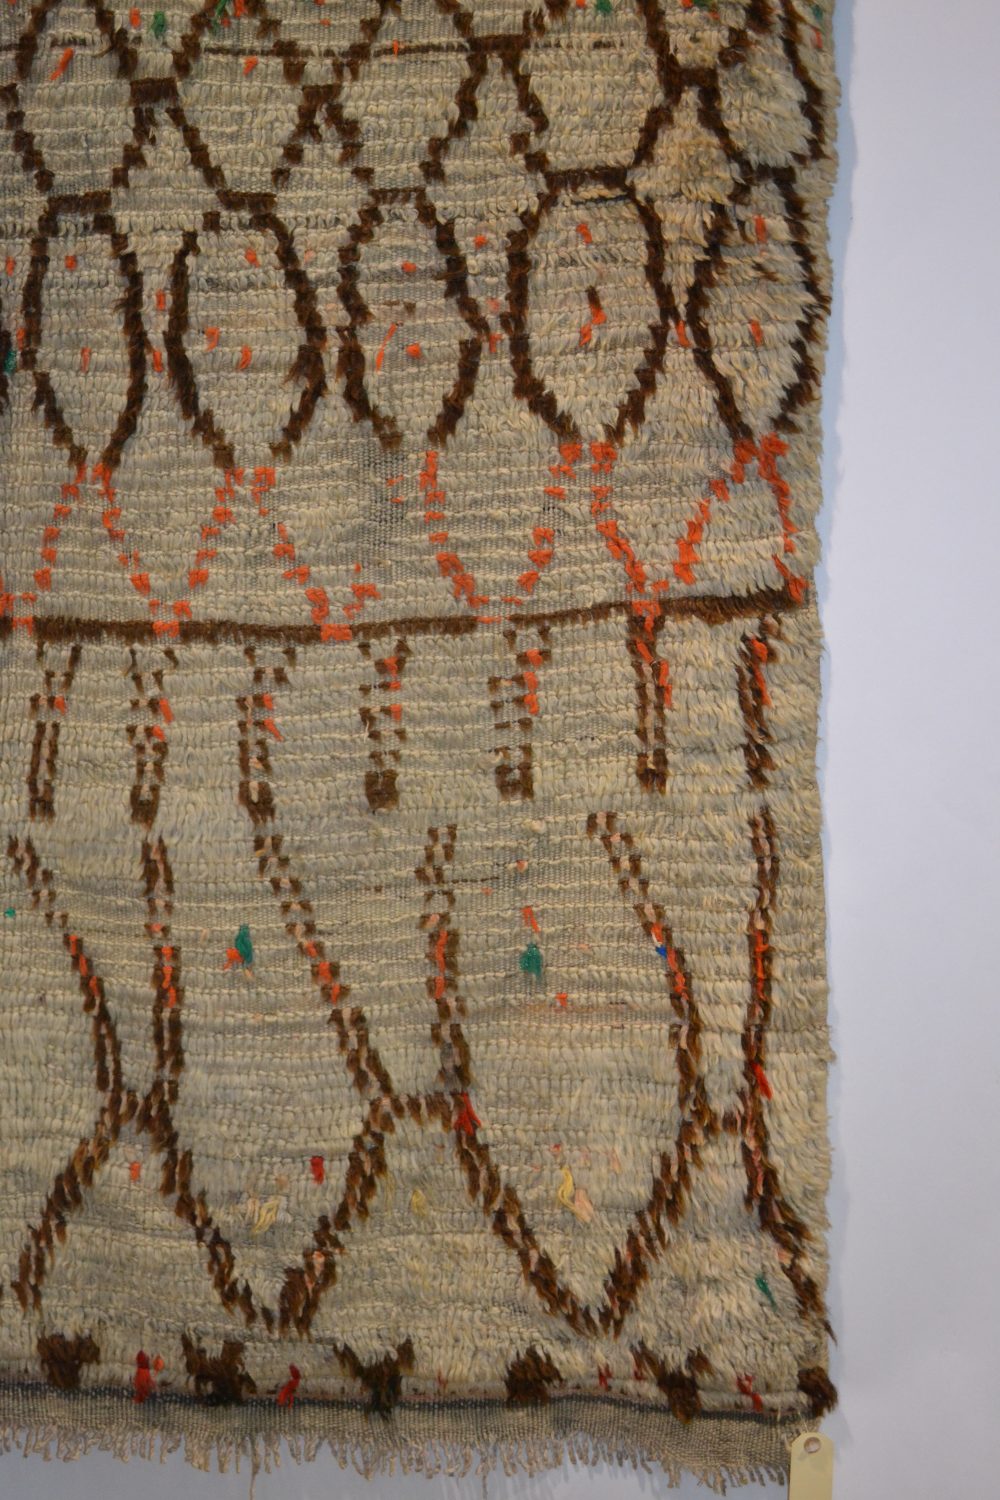 Beni Ouarain rug, Middle Atlas, Morocco, mid-20th century, 6ft. 7in. x 4ft. 2in. 2.01m. x 1.27m. - Image 3 of 4